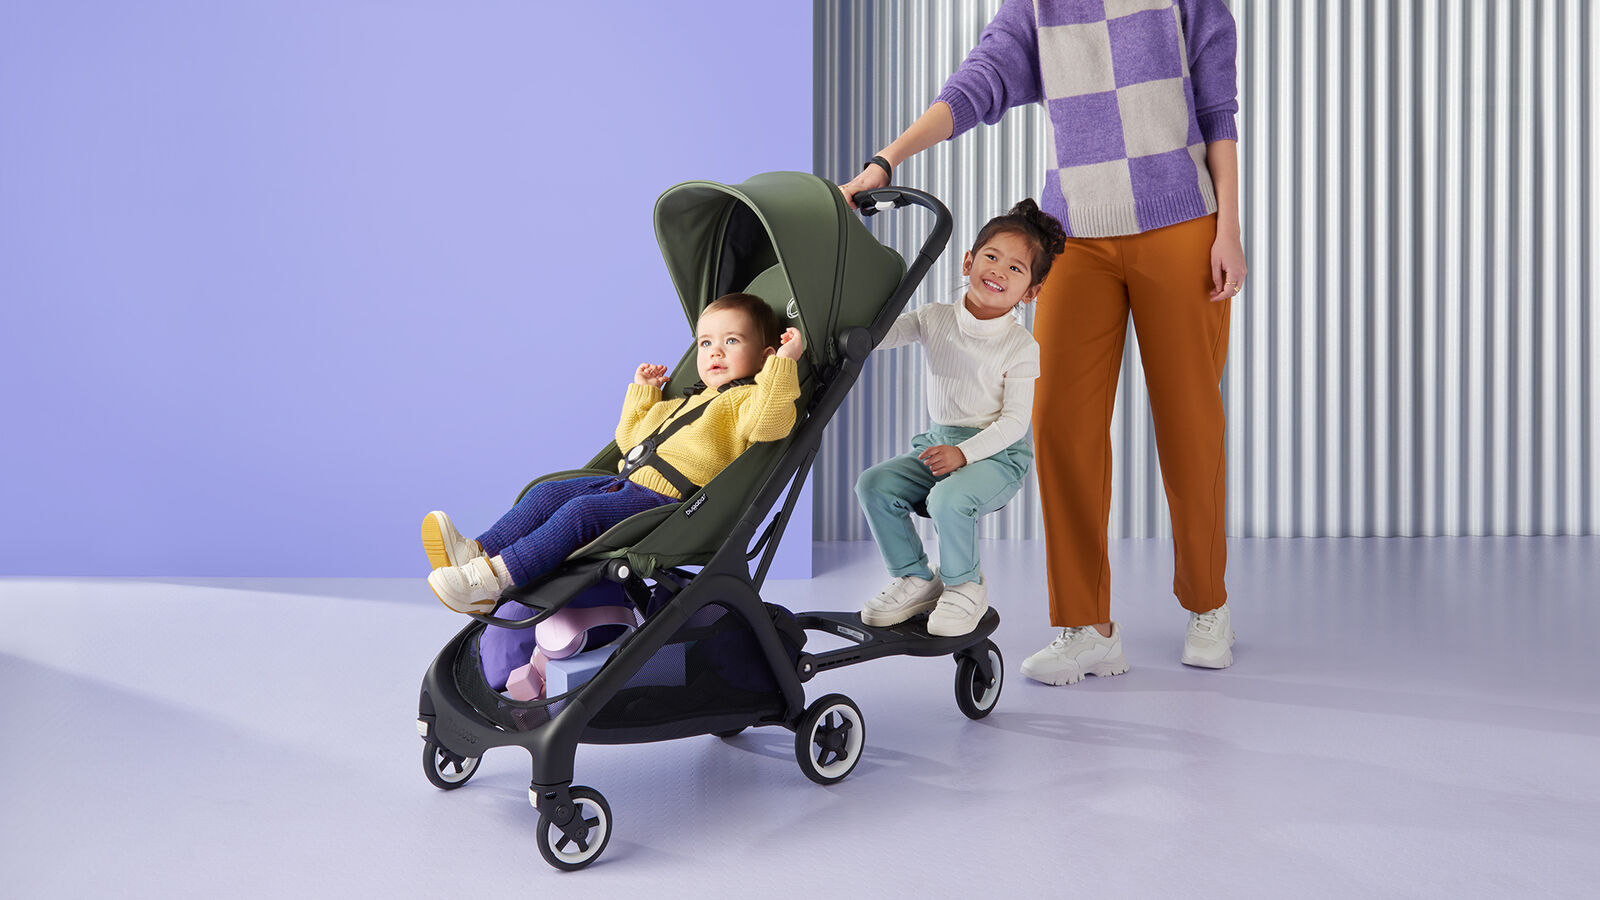 Patinete acoplado+ confort Bugaboo Butterfly